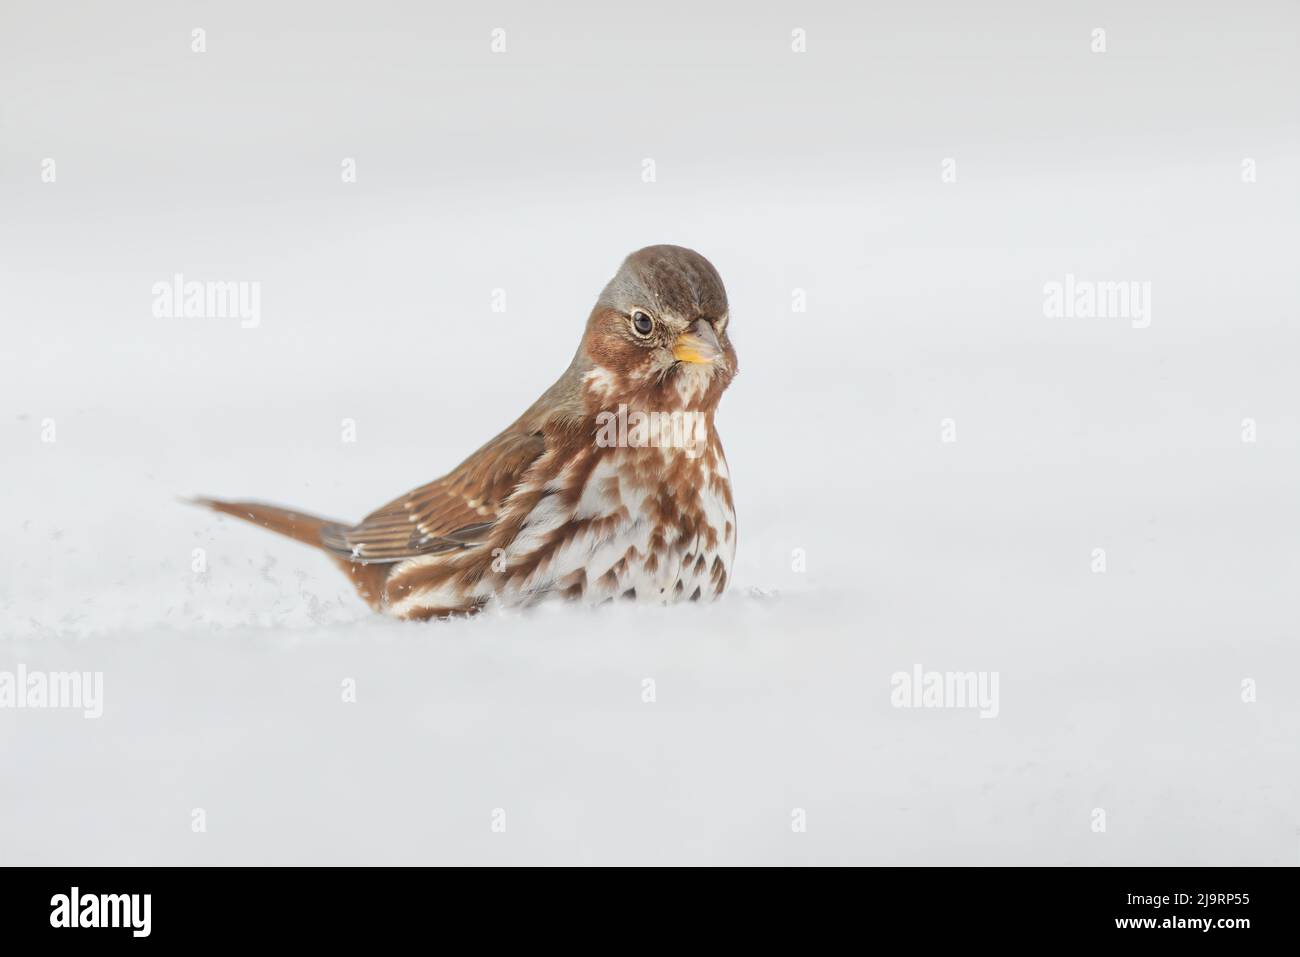 Volpe Sparrow foraging nella neve. Foto Stock